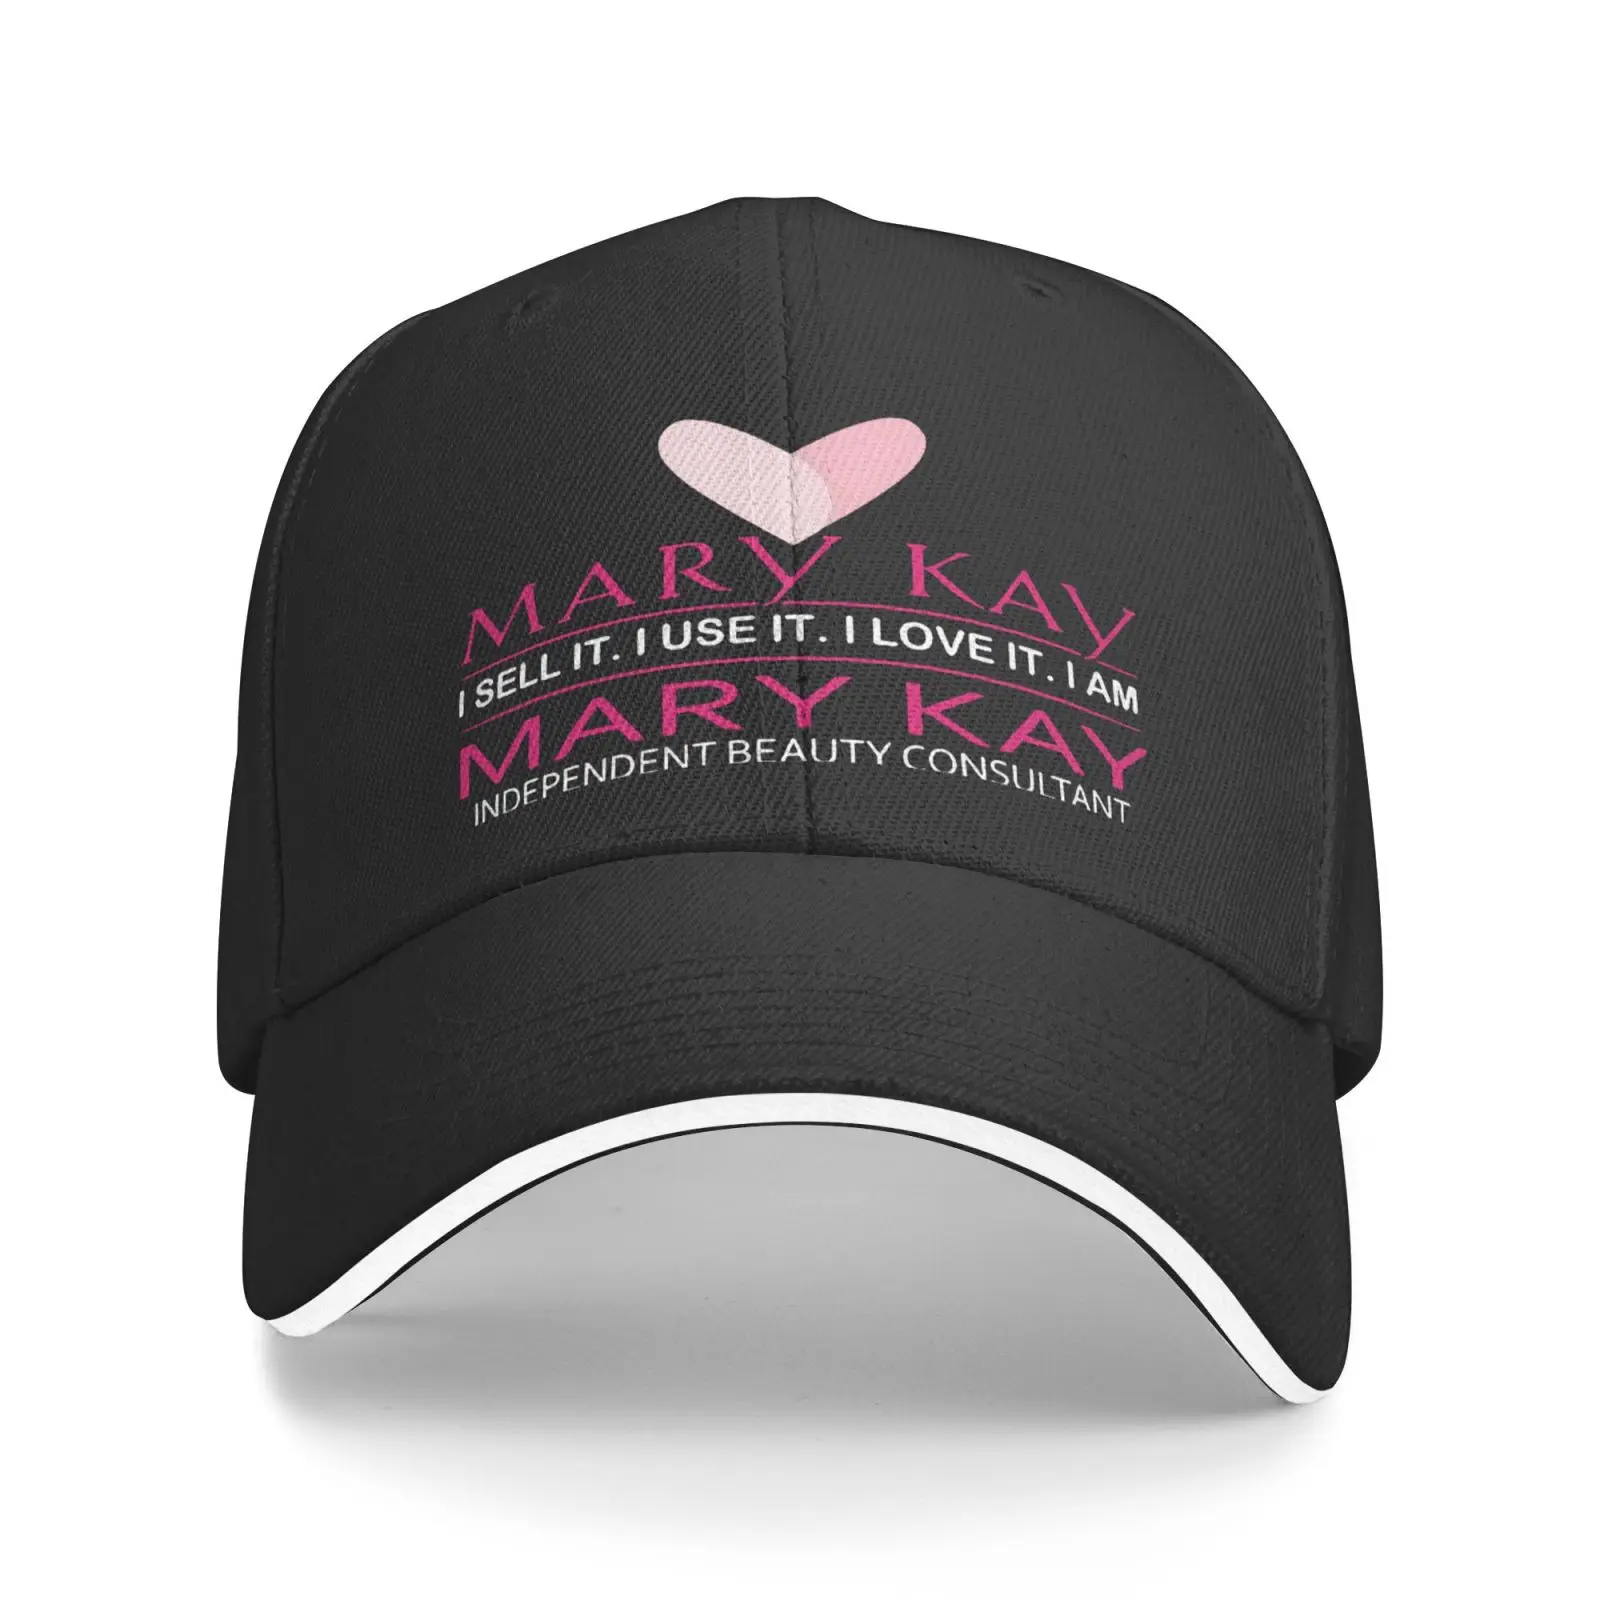 

Mary Kay I Sell It I 5946 Cap Hat Men Adventure Time Cowgirl Cowboy Hats Bucket Hat Trucker Hat Cap For Women Hats For Girls